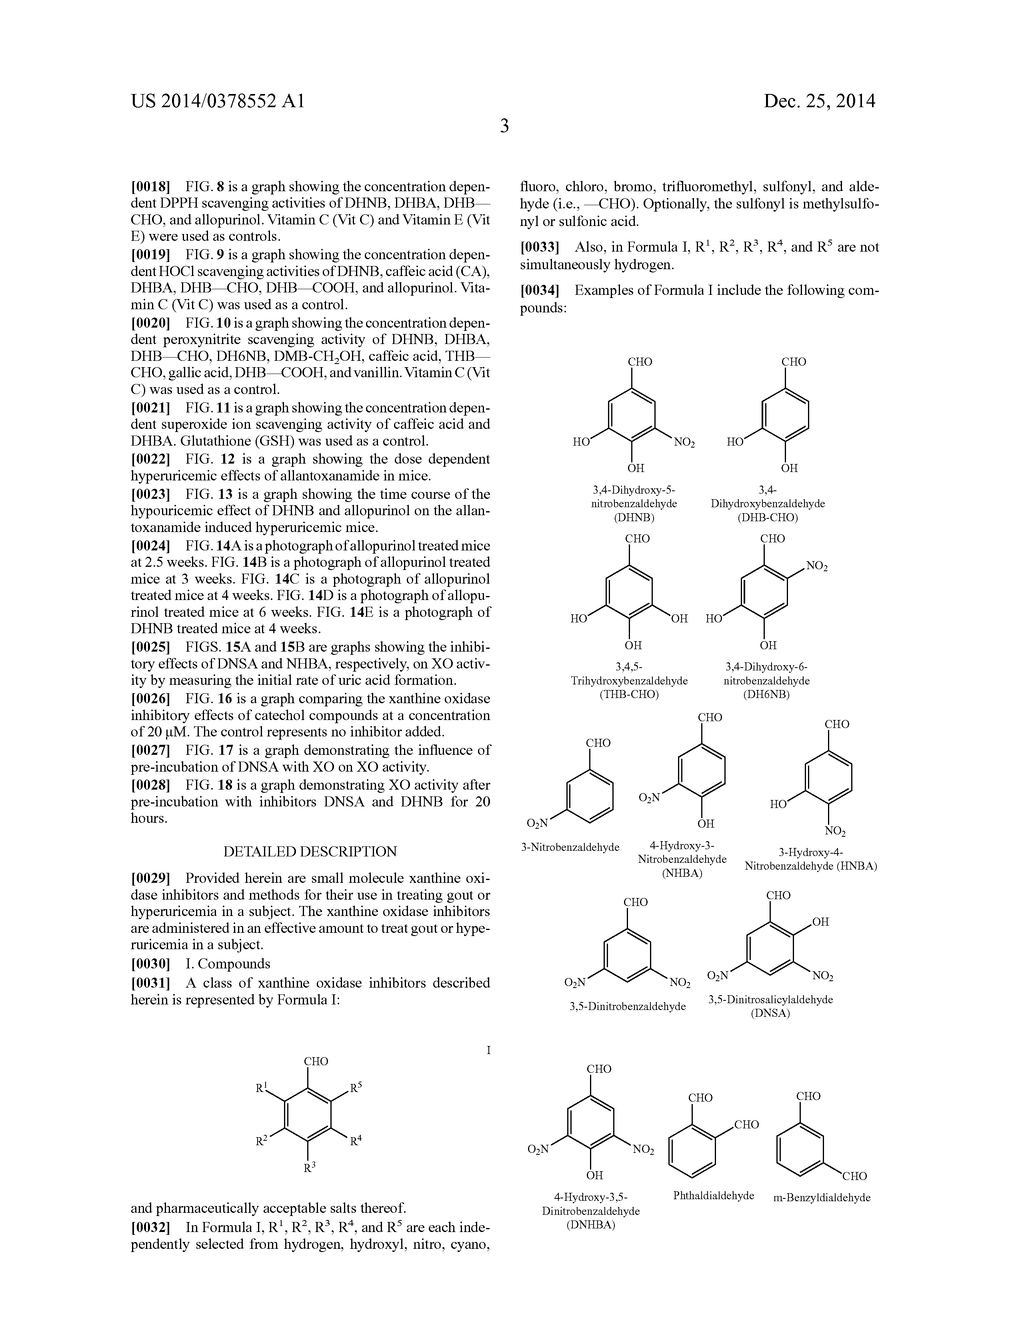 Small Molecule Xanthine Oxidase Inhibitors and Methods of Use - diagram, schematic, and image 18